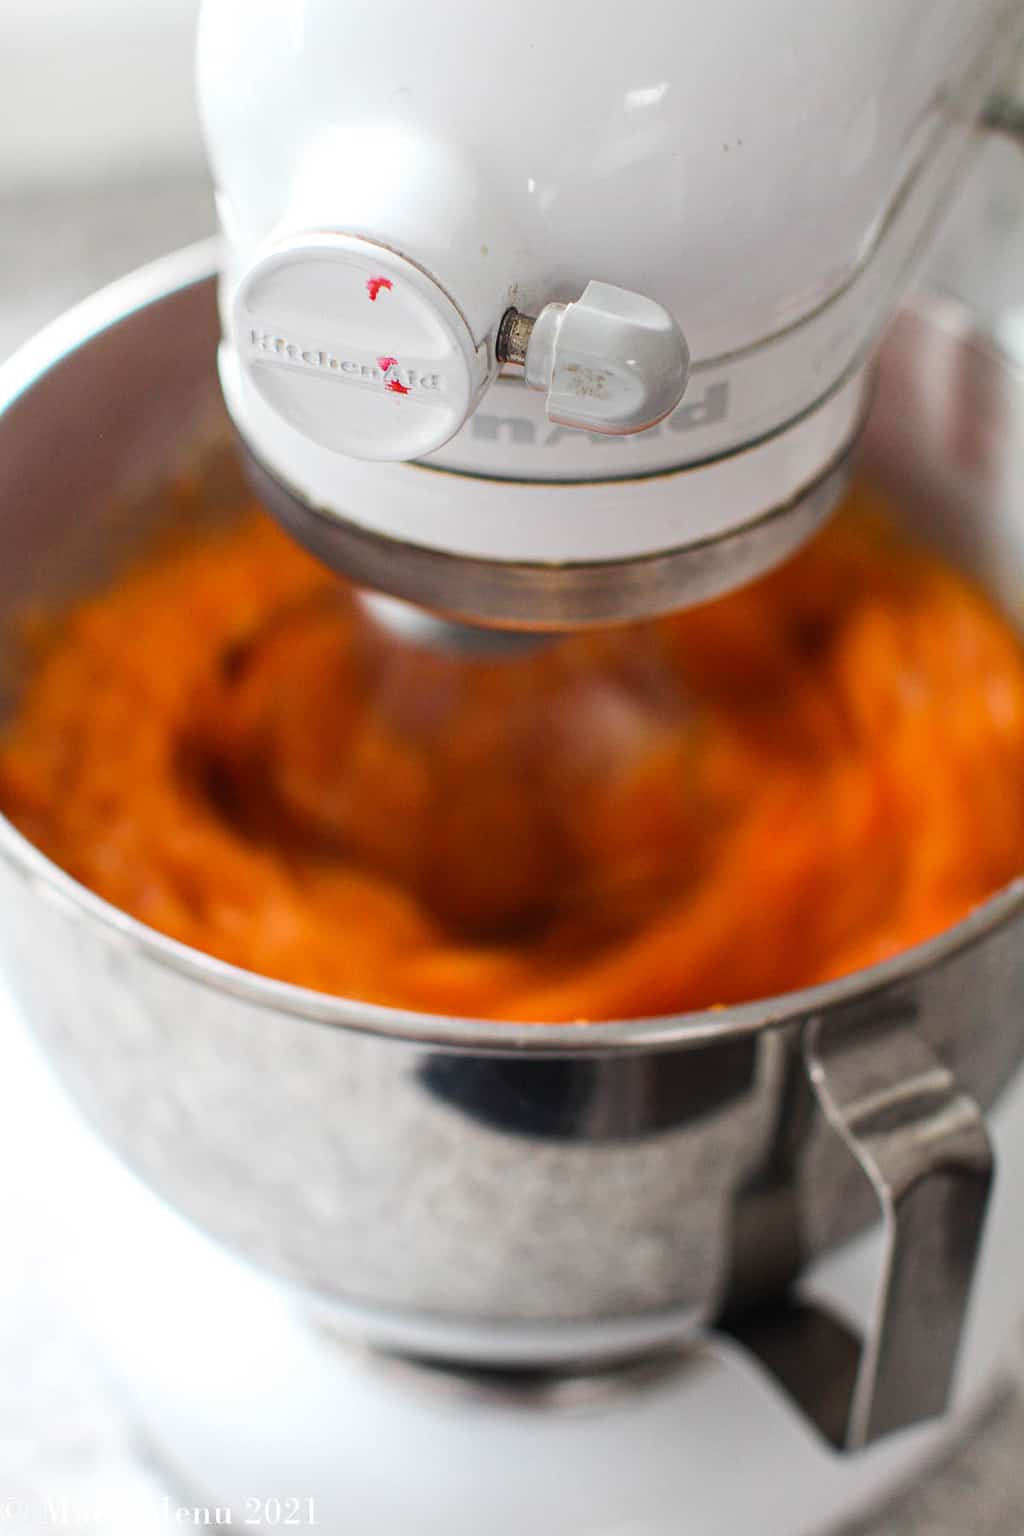 The stand mixer running on high, whipping up the sweet potato souffle